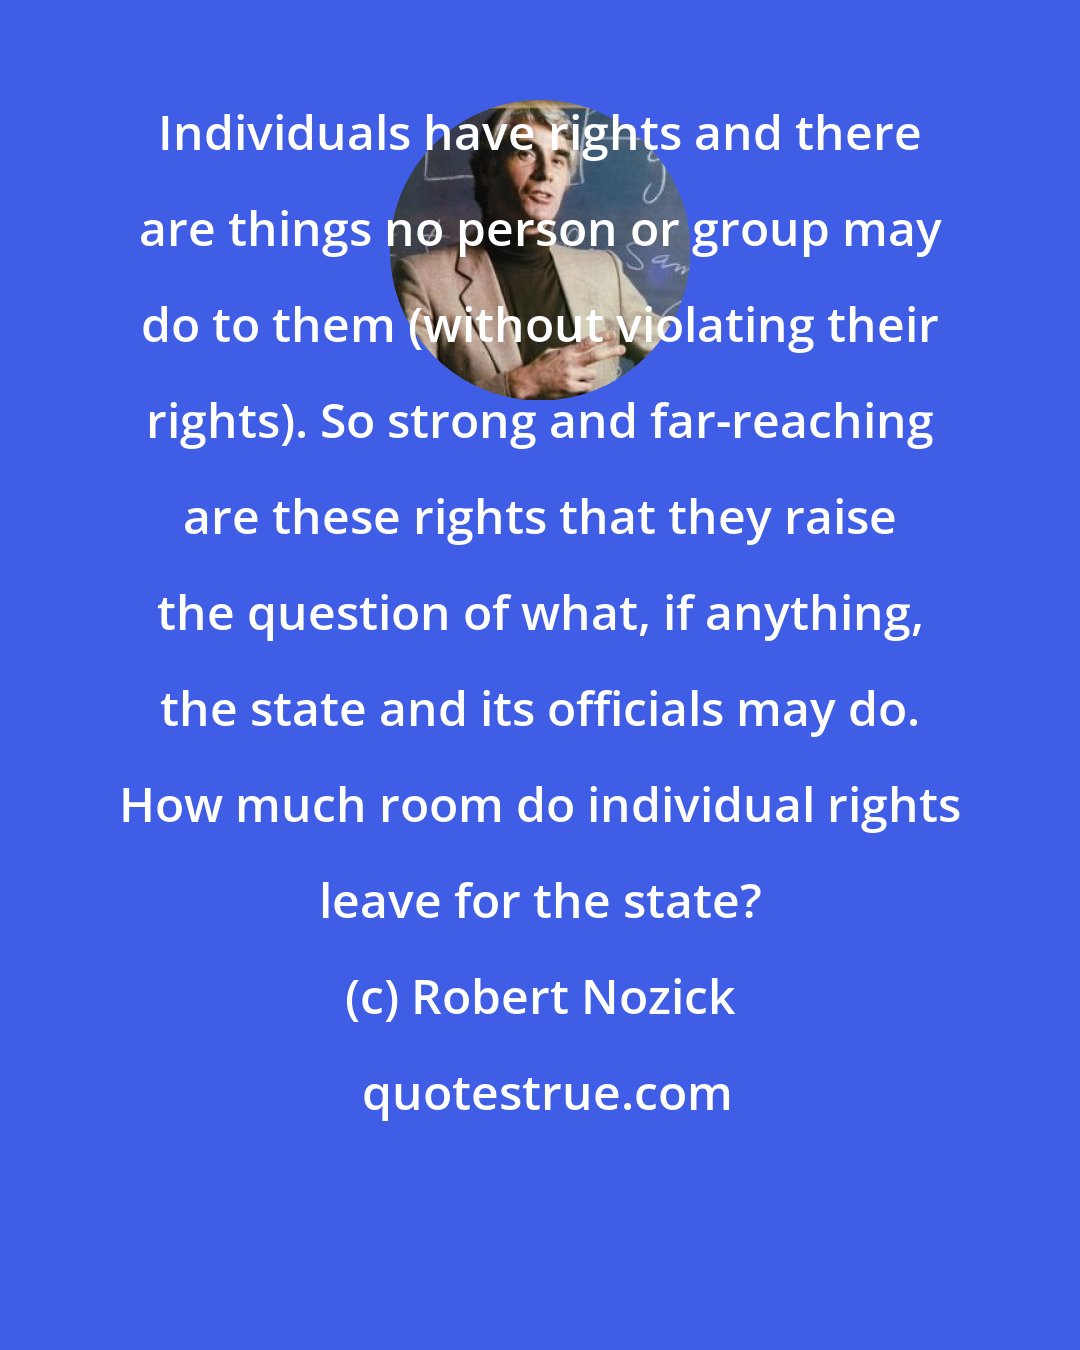 Robert Nozick: Individuals have rights and there are things no person or group may do to them (without violating their rights). So strong and far-reaching are these rights that they raise the question of what, if anything, the state and its officials may do. How much room do individual rights leave for the state?